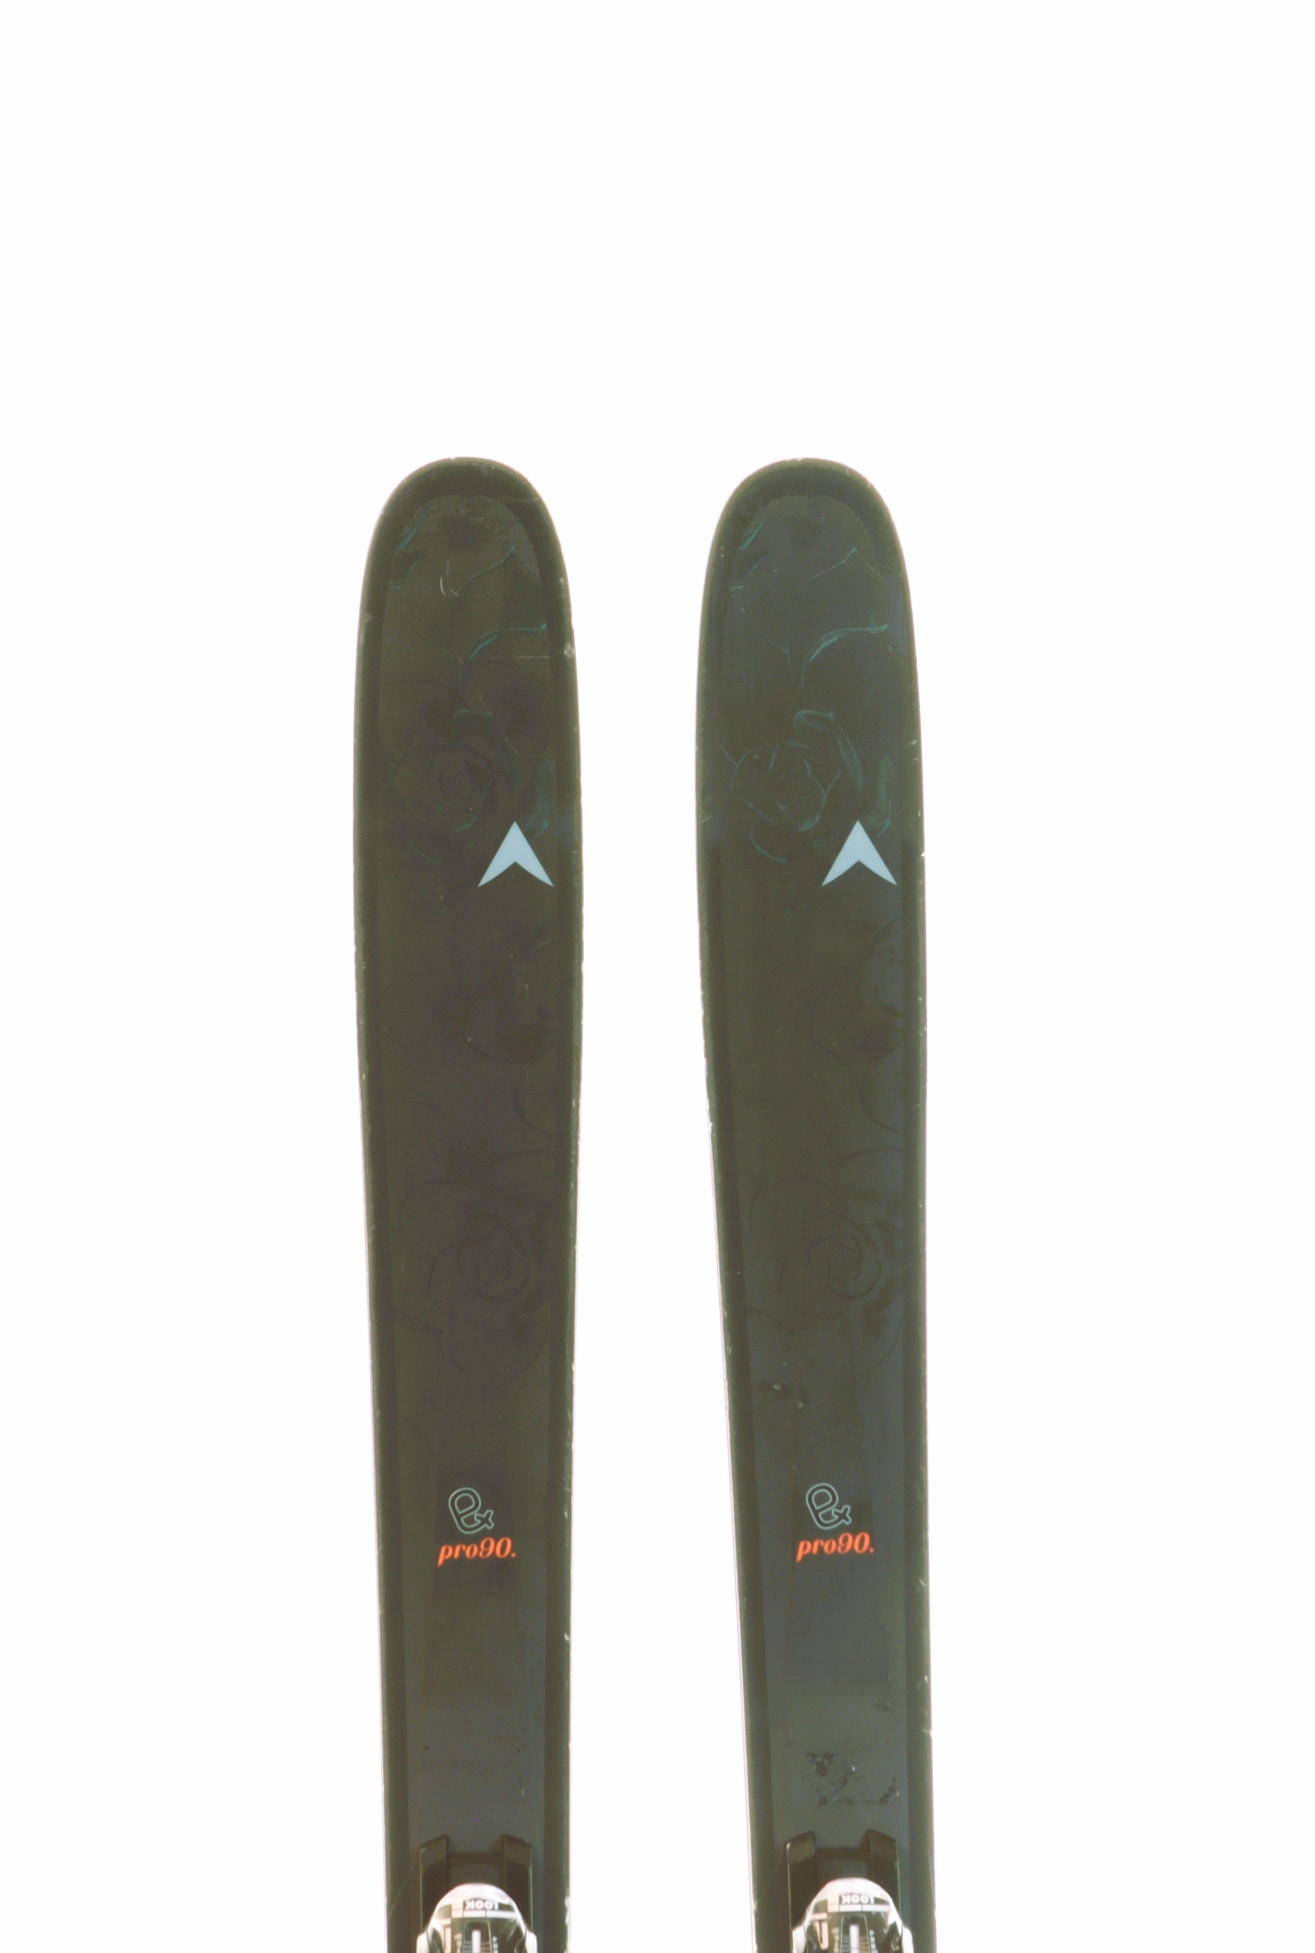 Used 2023 Dynastar E Pro 90 Skis With Look NX 12 Bindings Size 170 (Option 230578)